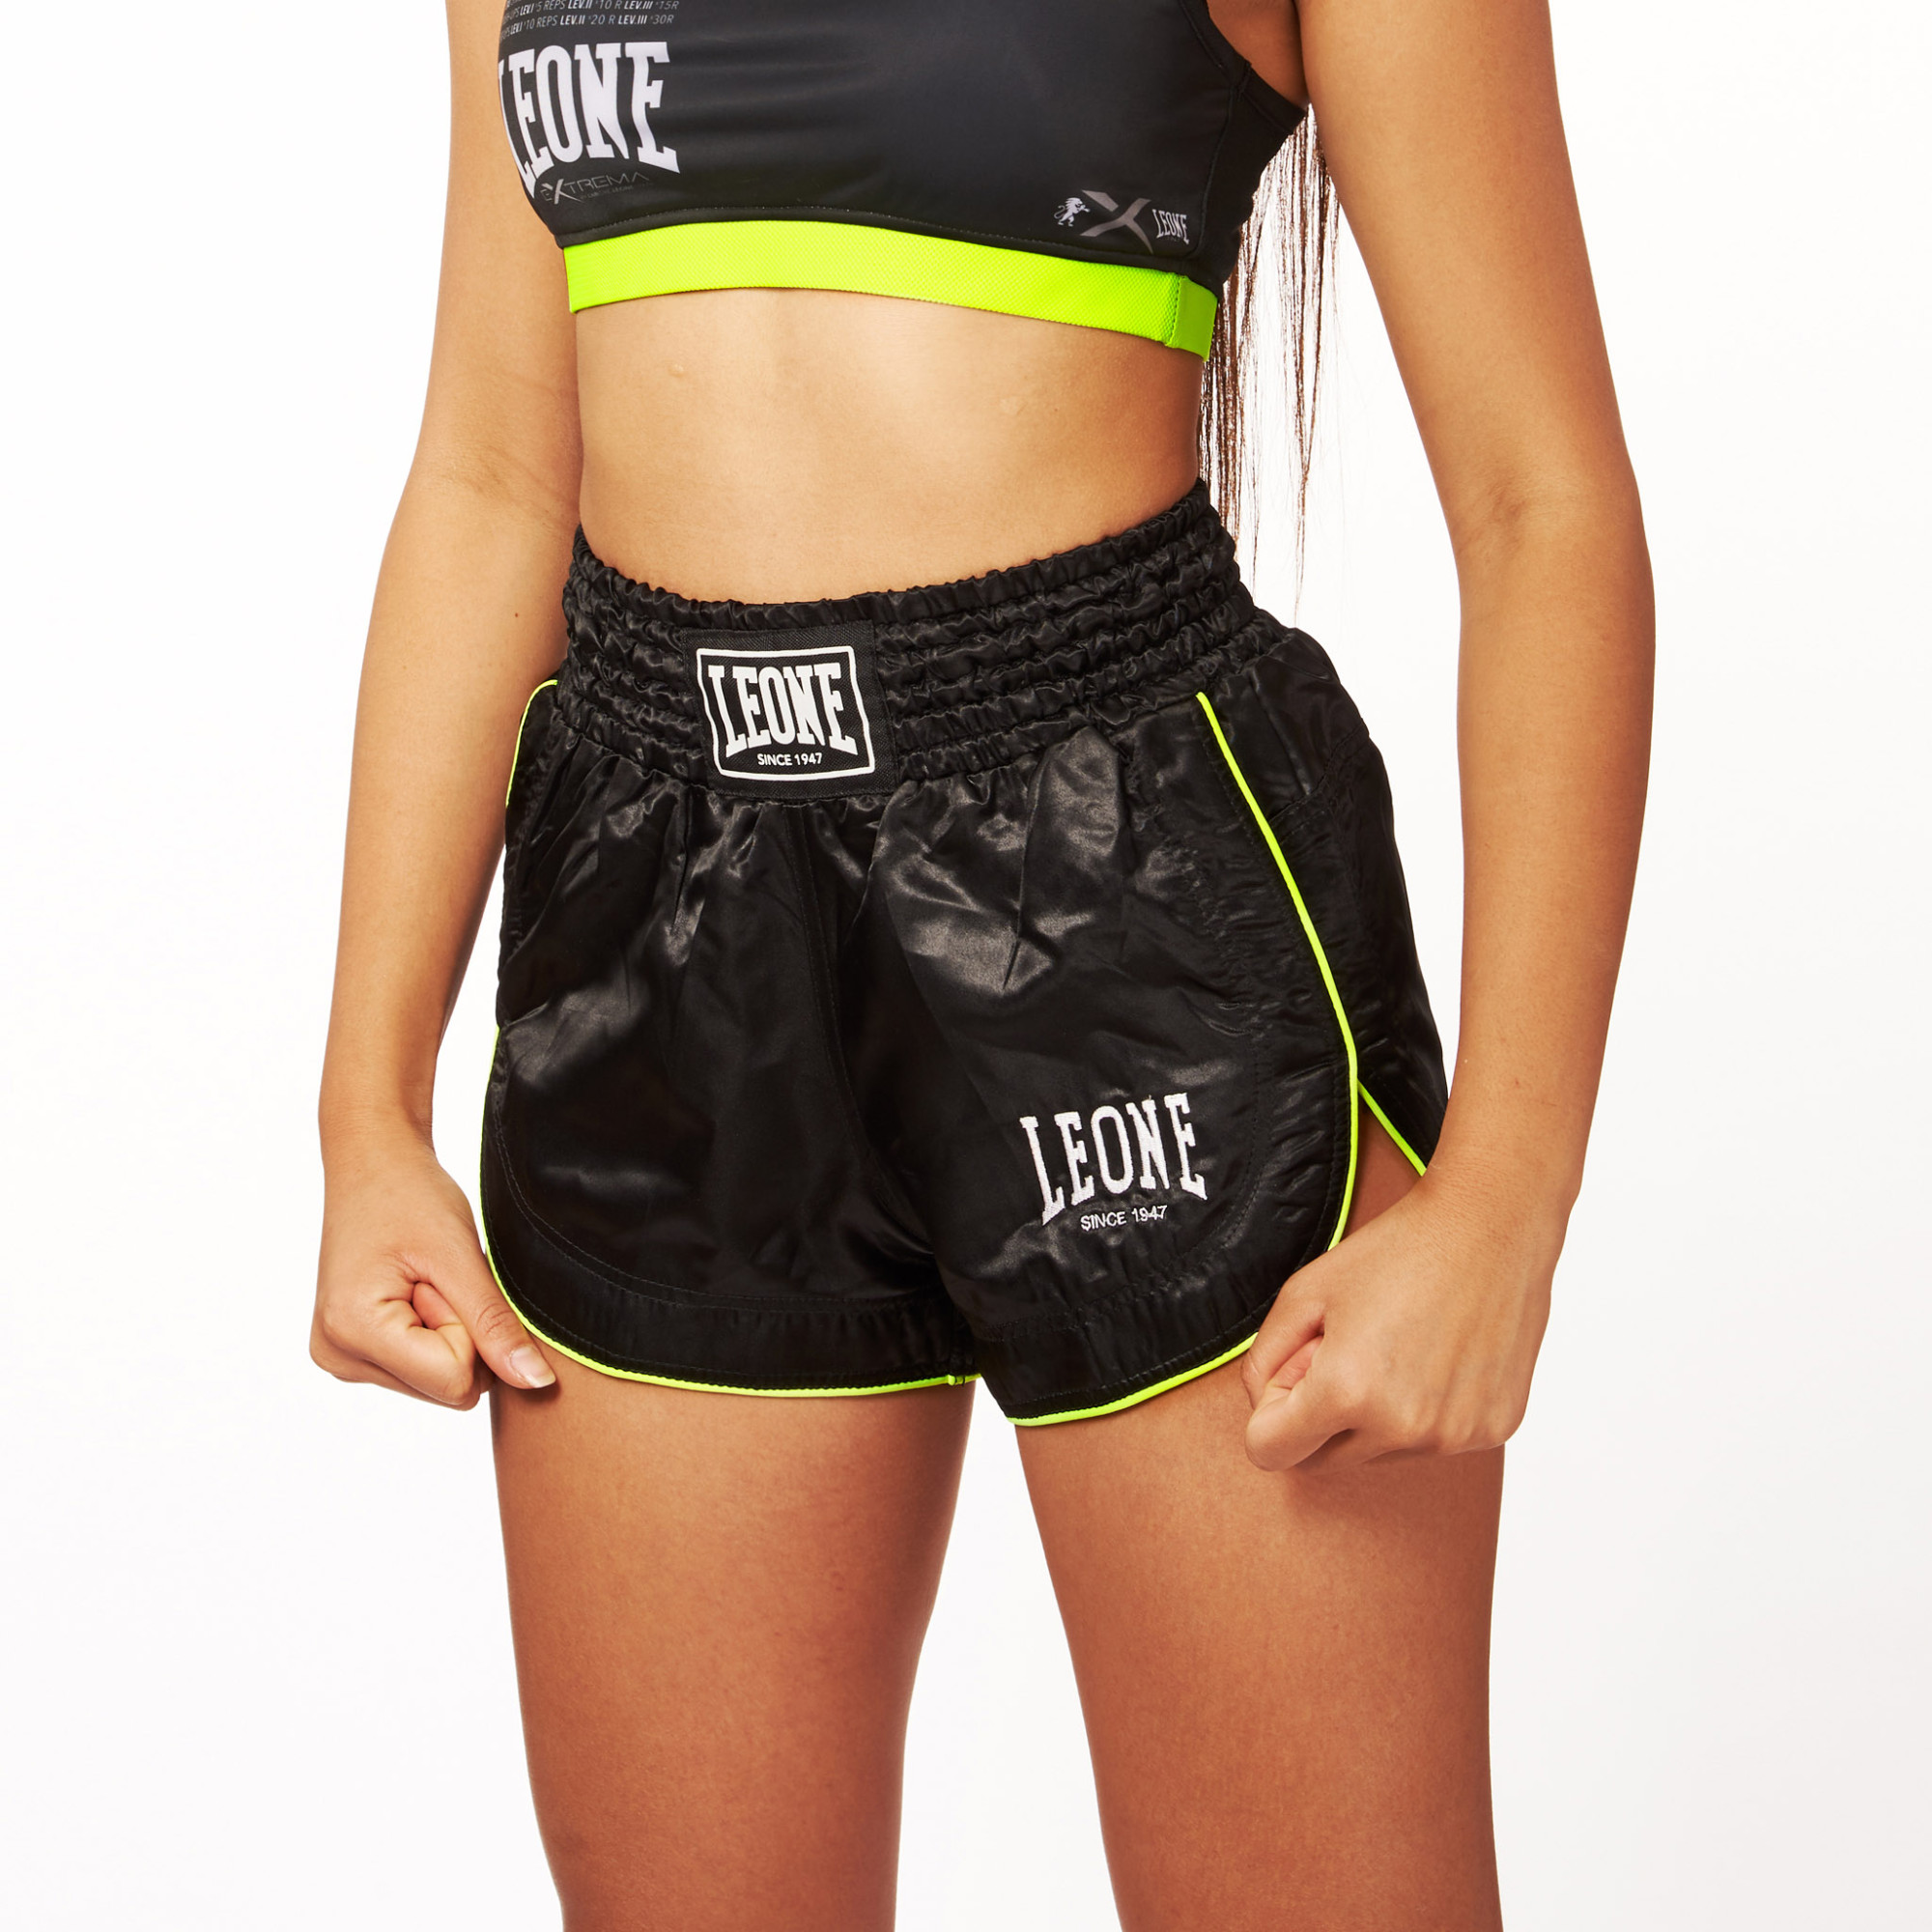 View our Women Boxing Shorts Leone 1947 FIGHTER LIFE W AB281 at